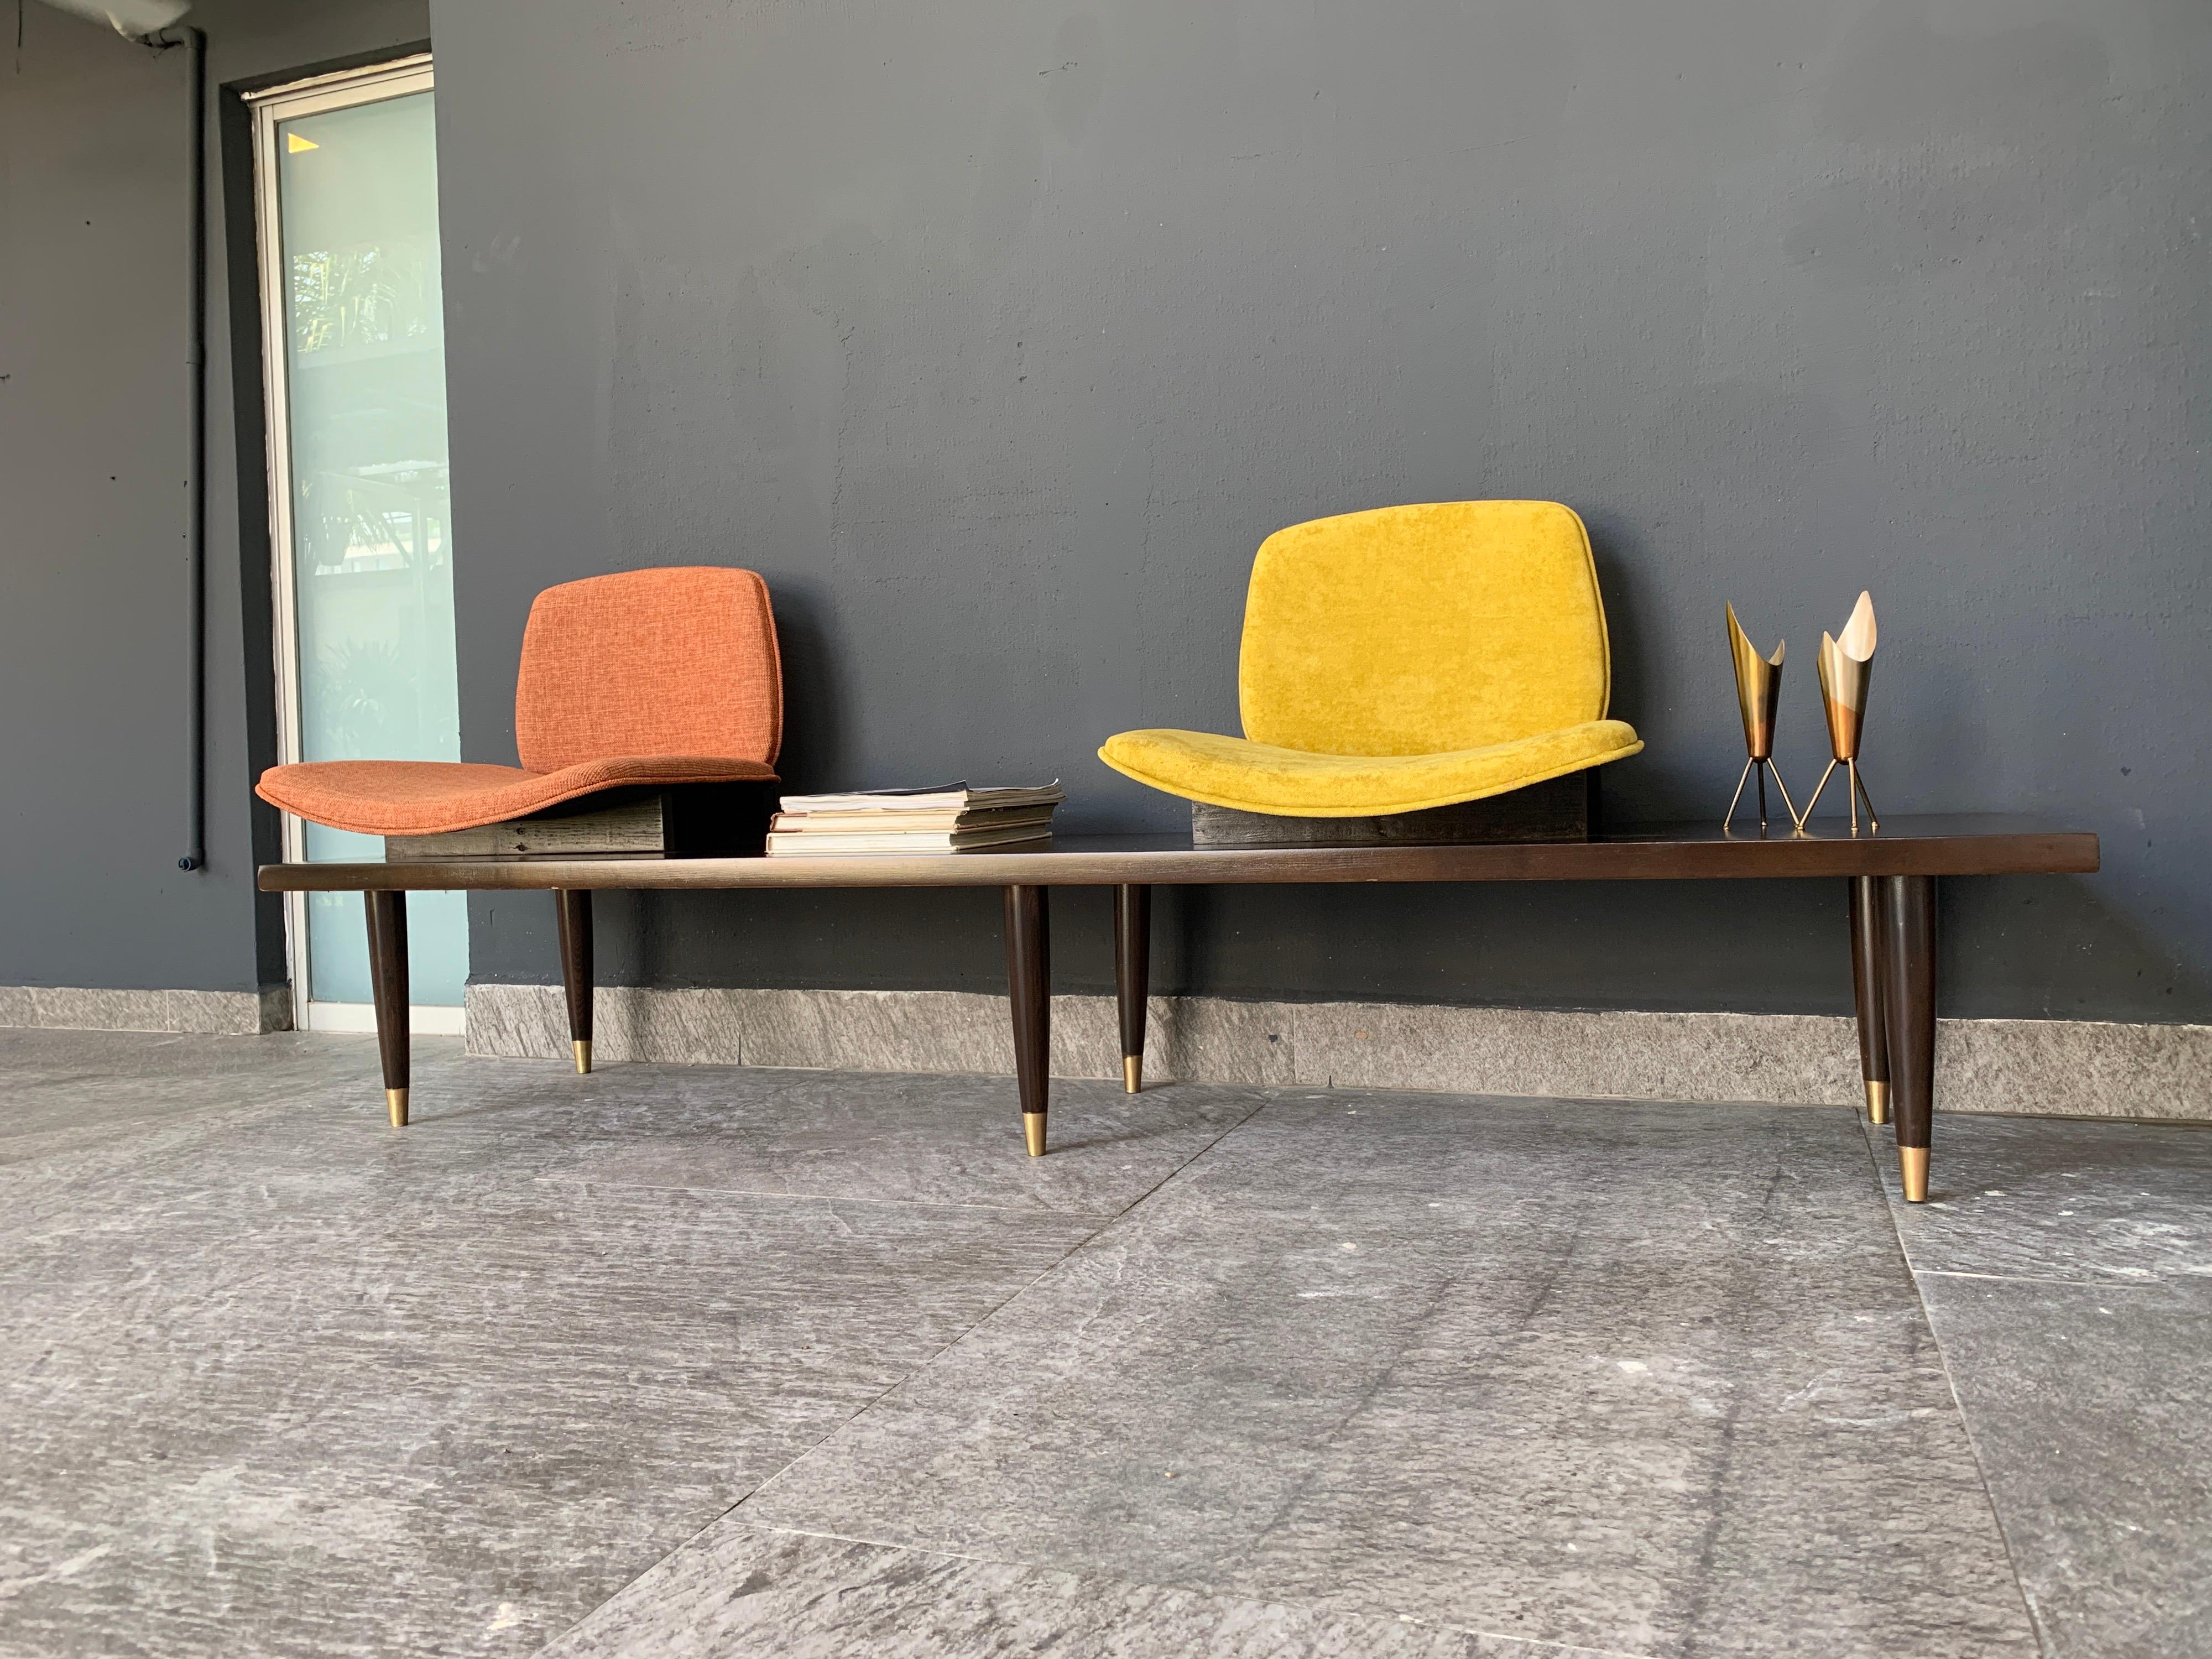 Modern bench 180 cms long, originally it had three seats but we decided to leave only two. The piece was in the waiting room of a renowned architectural firm. Includes small square stool of 50 x 50 cm.